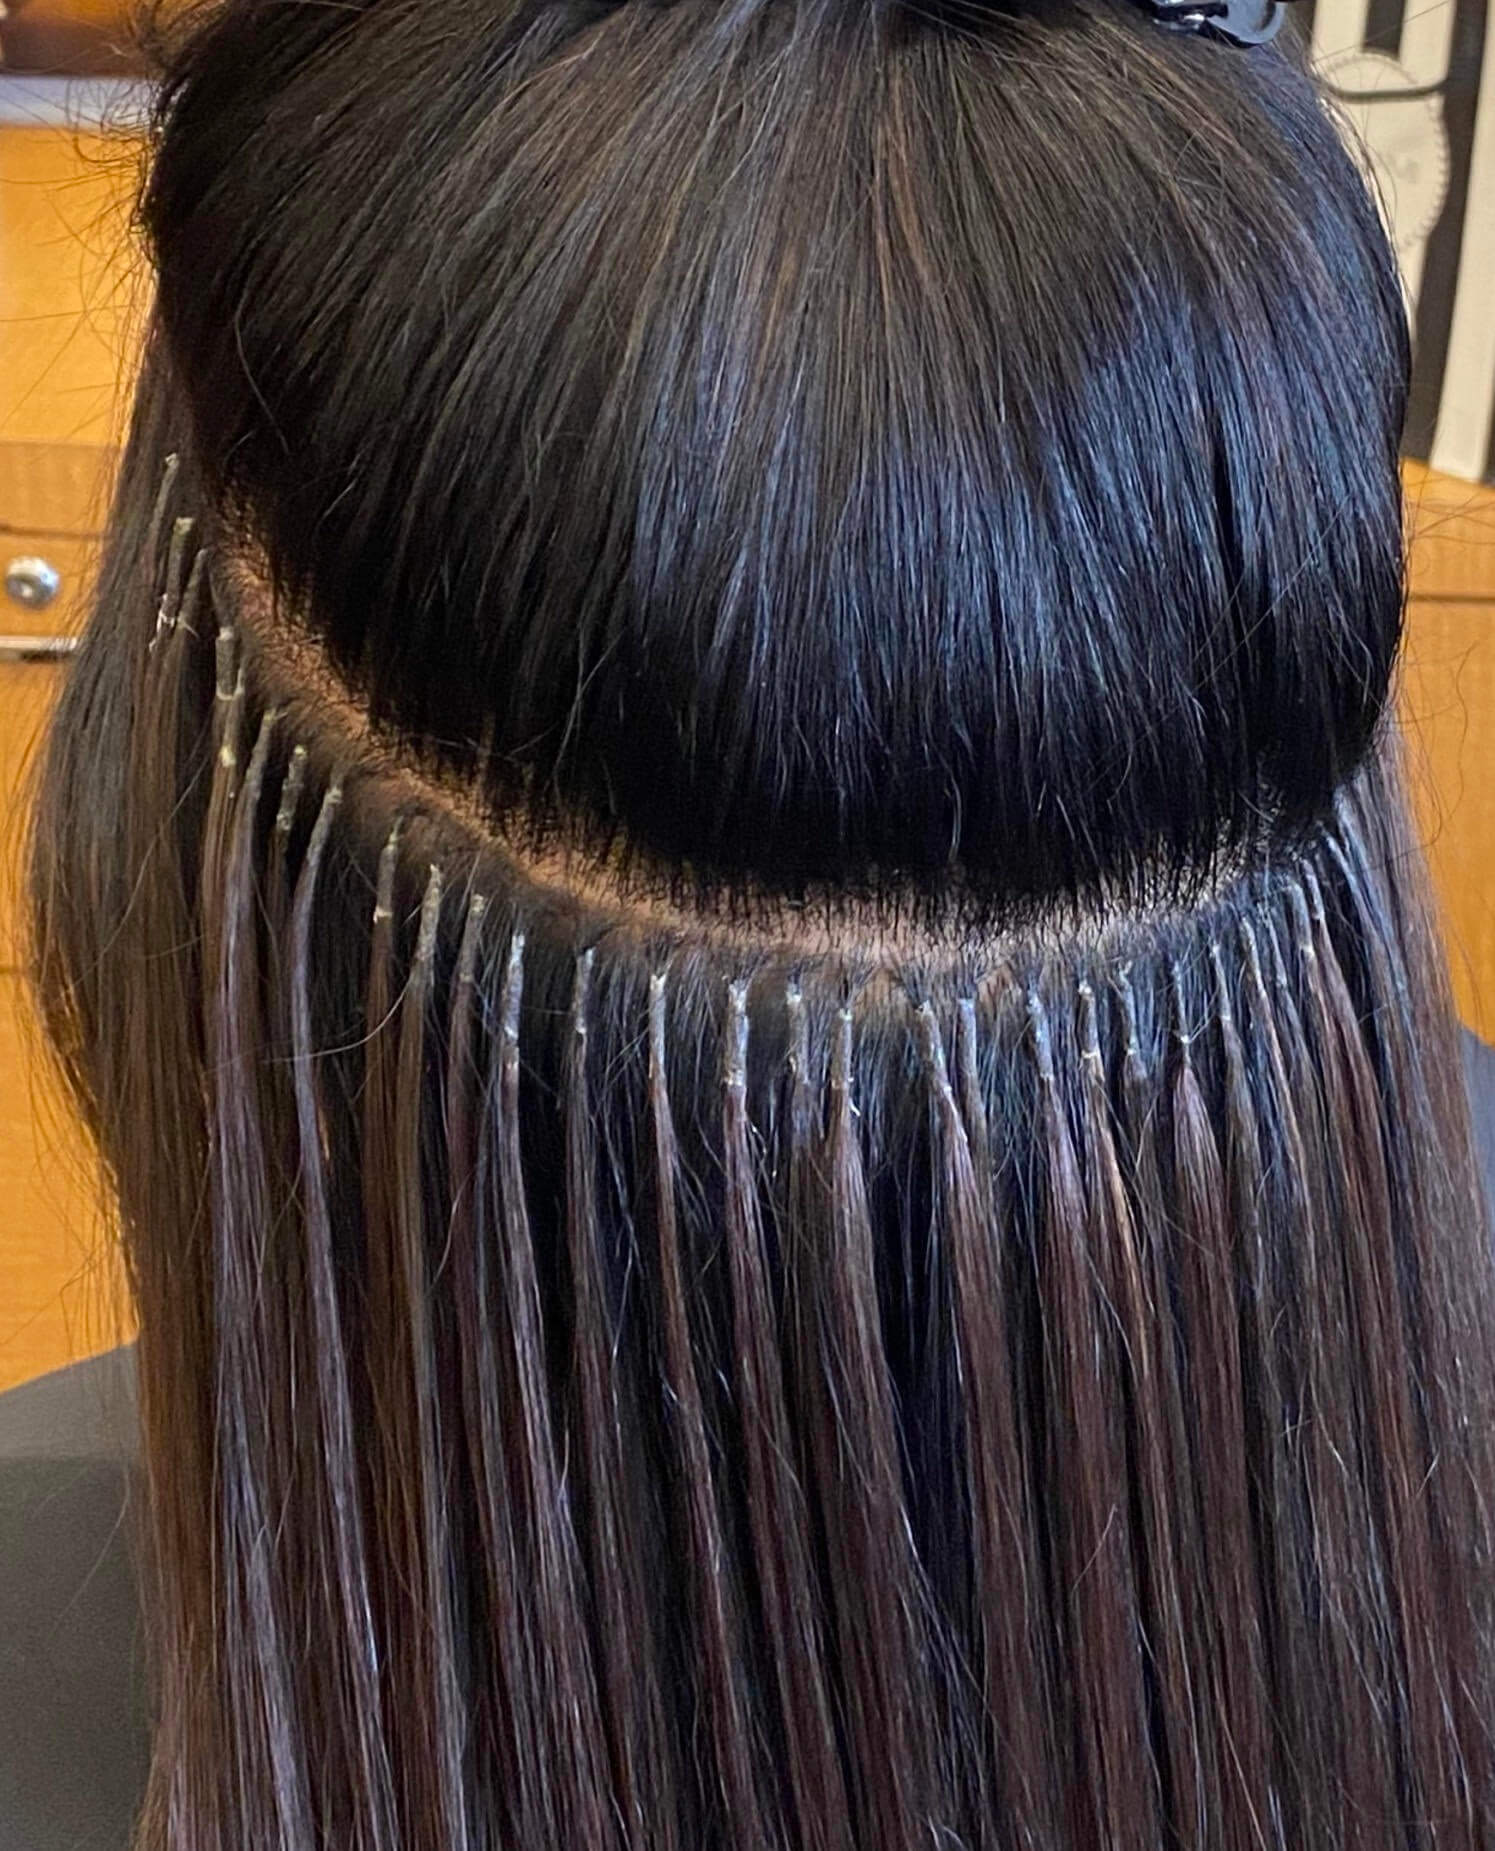 Glue hair extensions | a popular method of hair extension